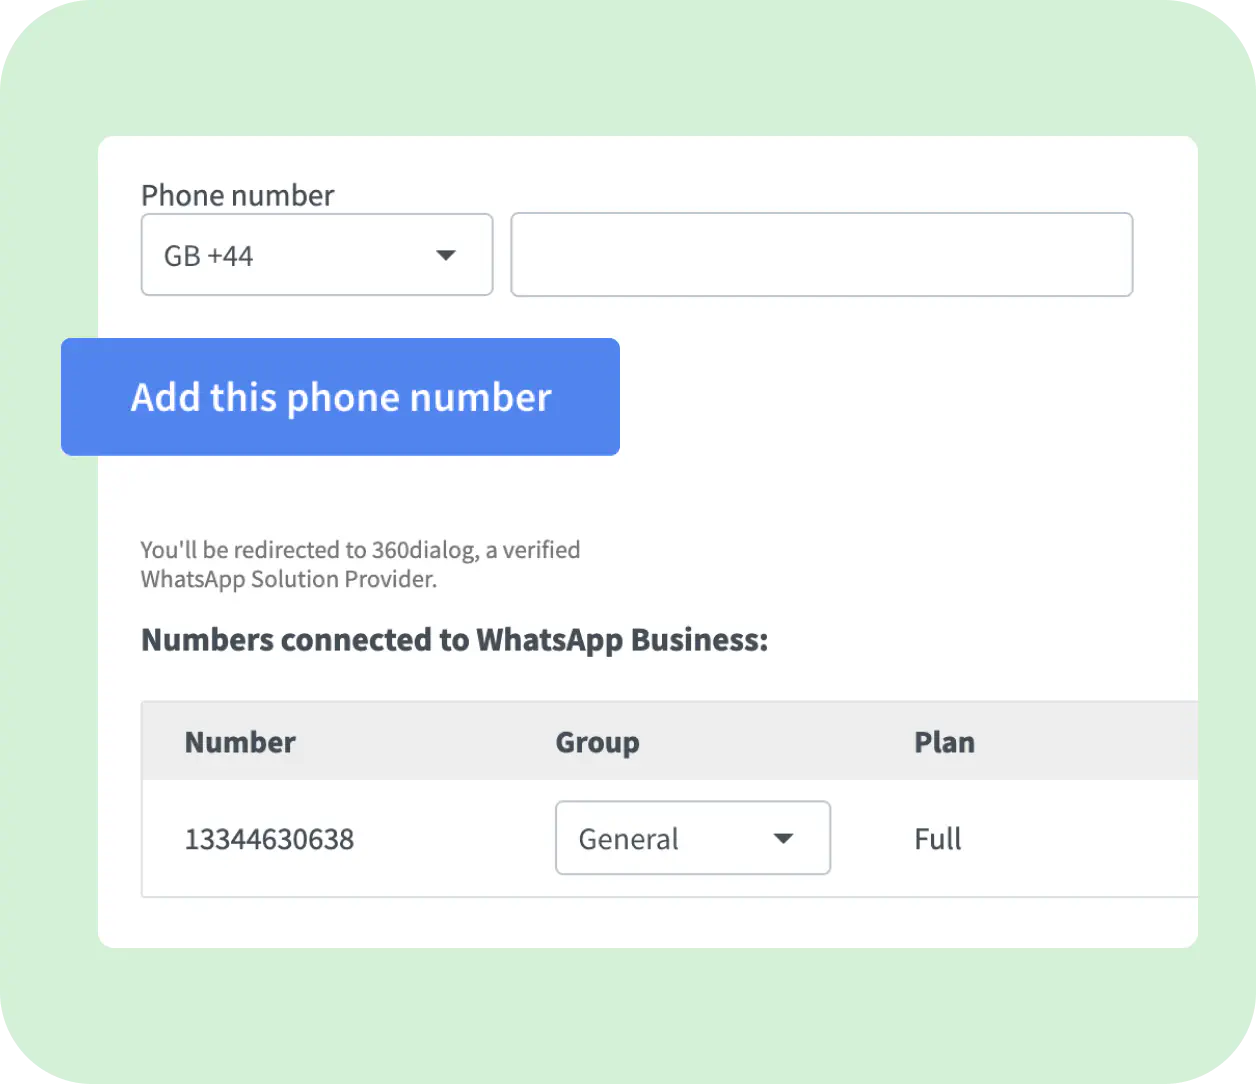 LiveChat’s feature allowing connection of multiple WhatsApp accounts on different smartphones